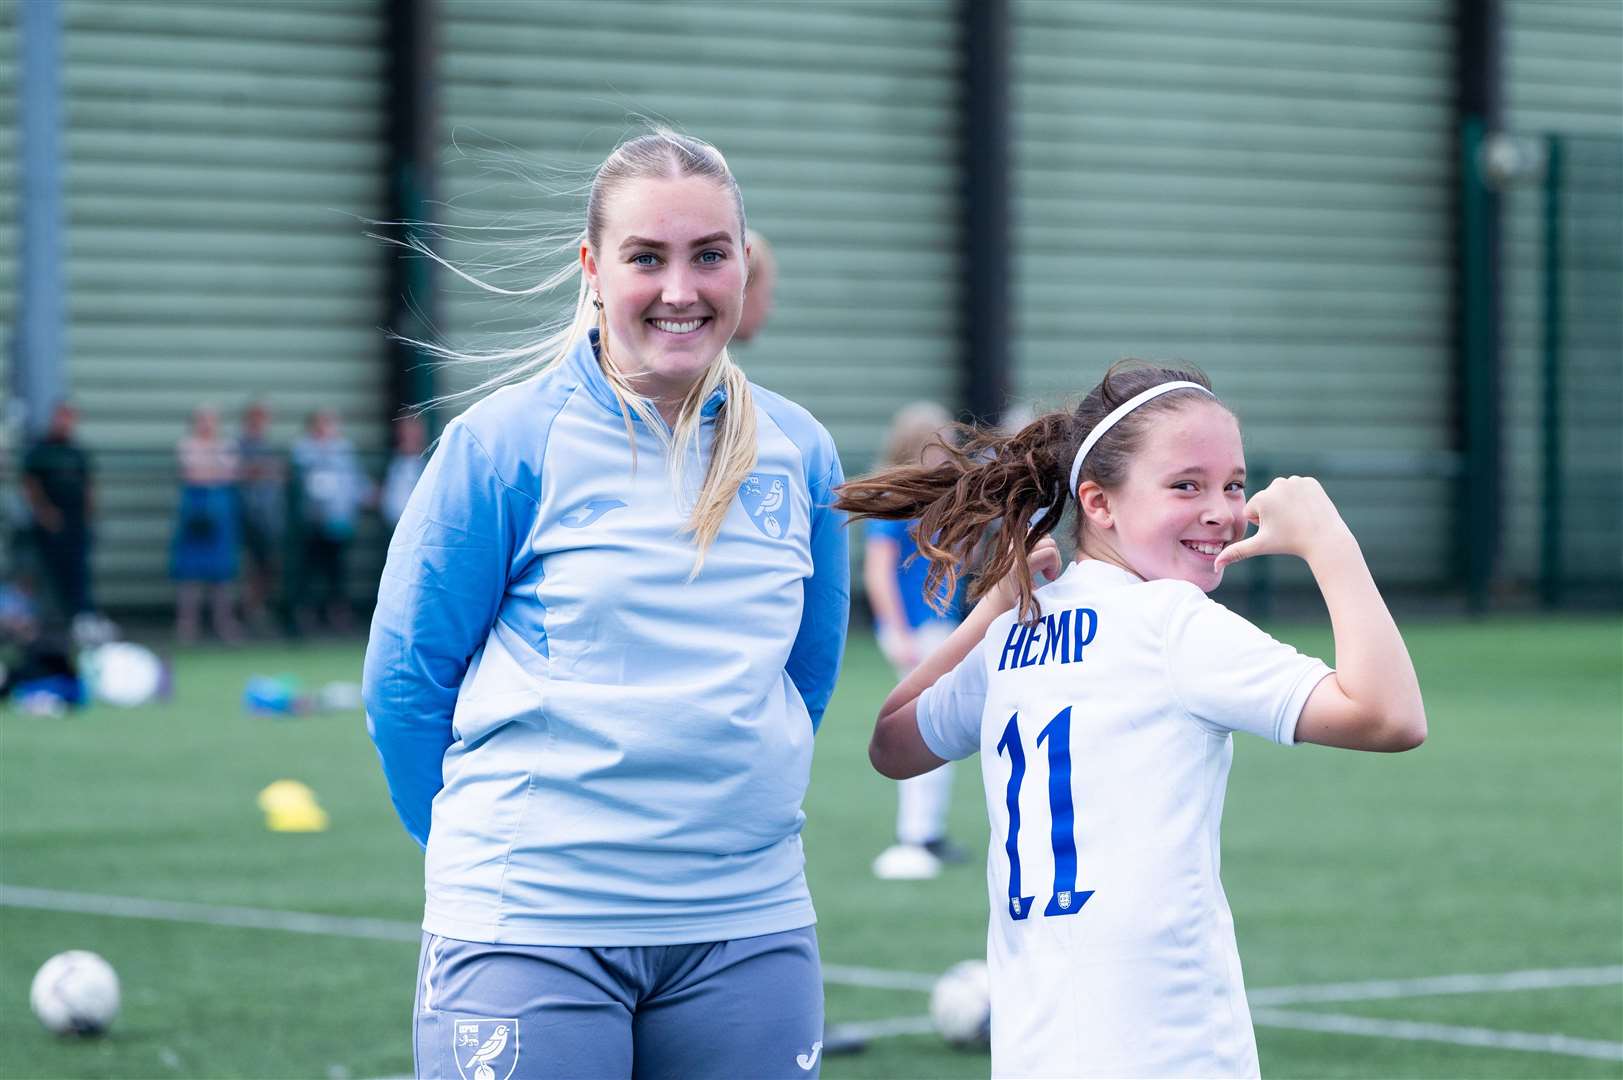 Action from the girls' football festival, organised by the Norwich City Community Sports Foundation on behalf of the Mid Norfolk Youth League at Alive Lynnsport on Saturday. Picture: Ian Burt